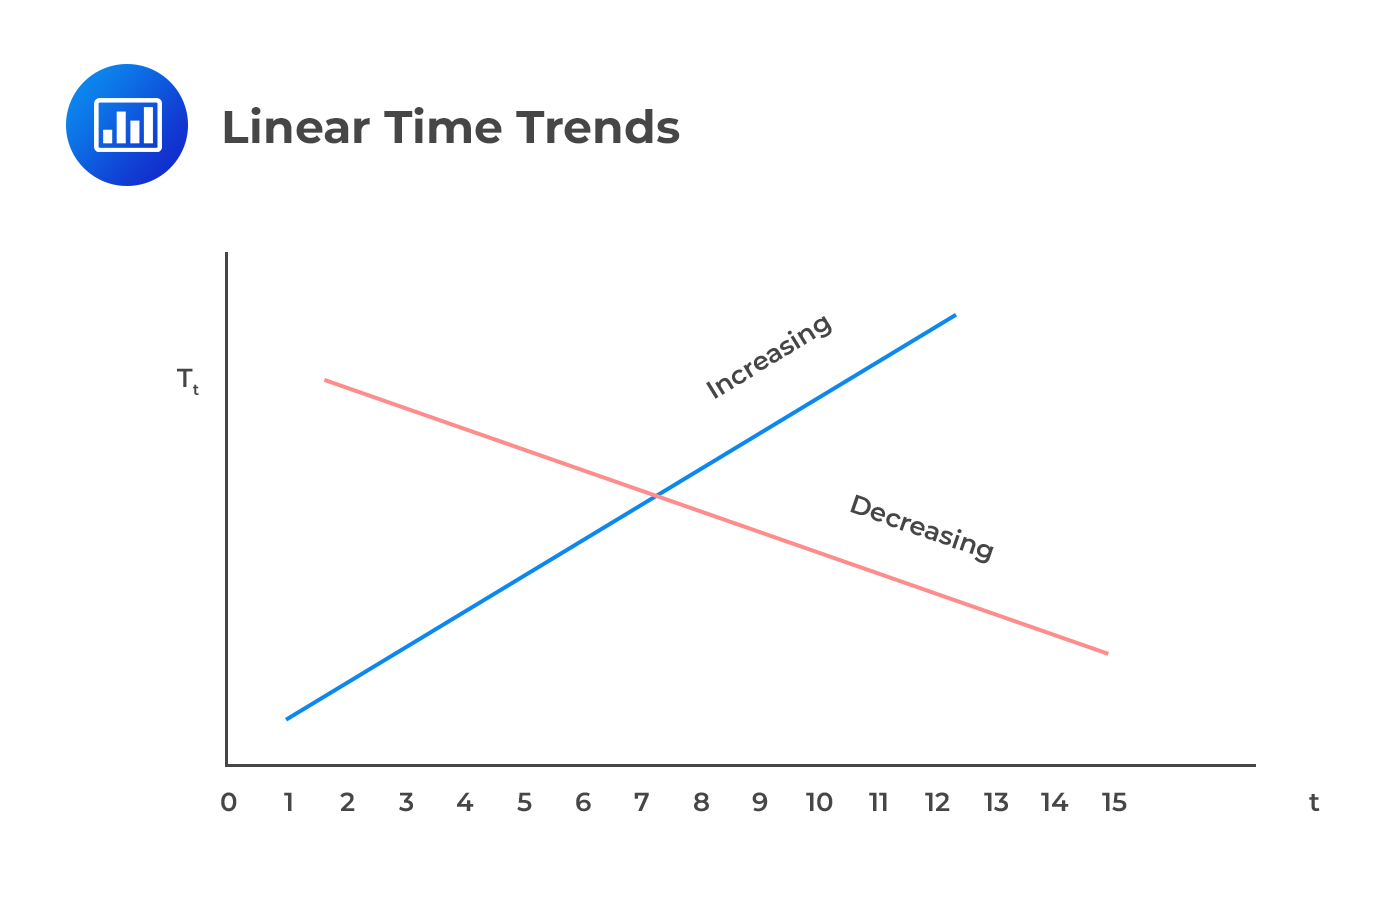 Linear Time Trends